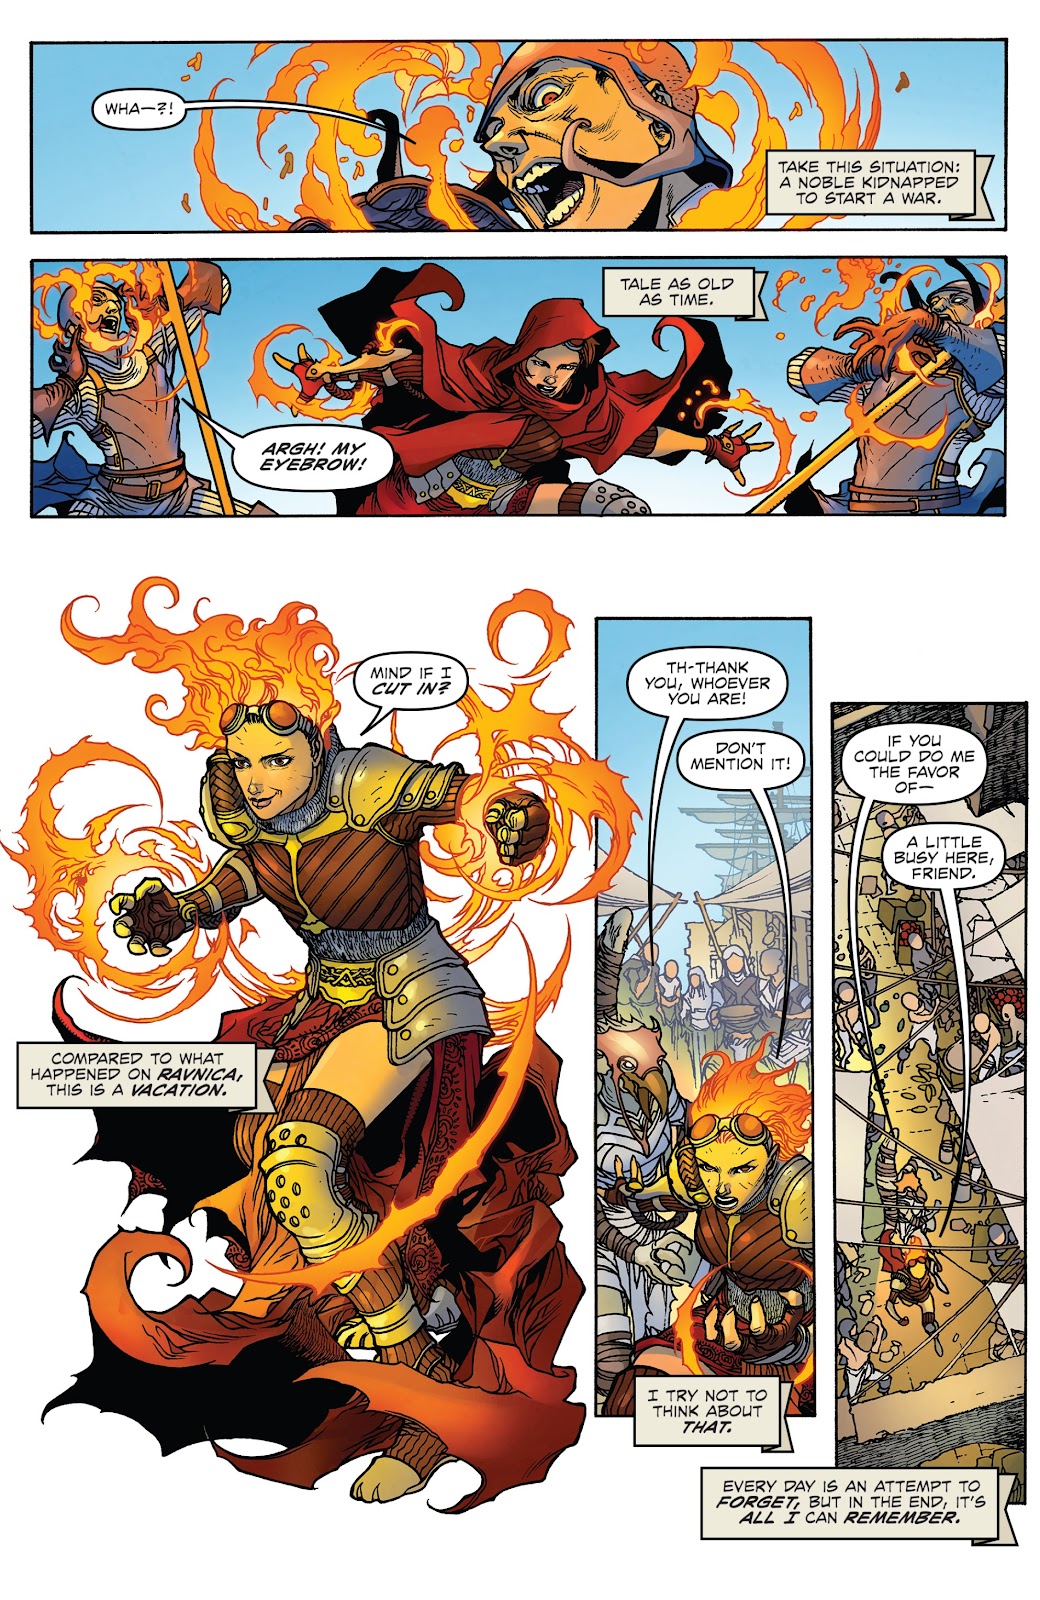 Magic: The Gathering: Chandra issue 2 - Page 7